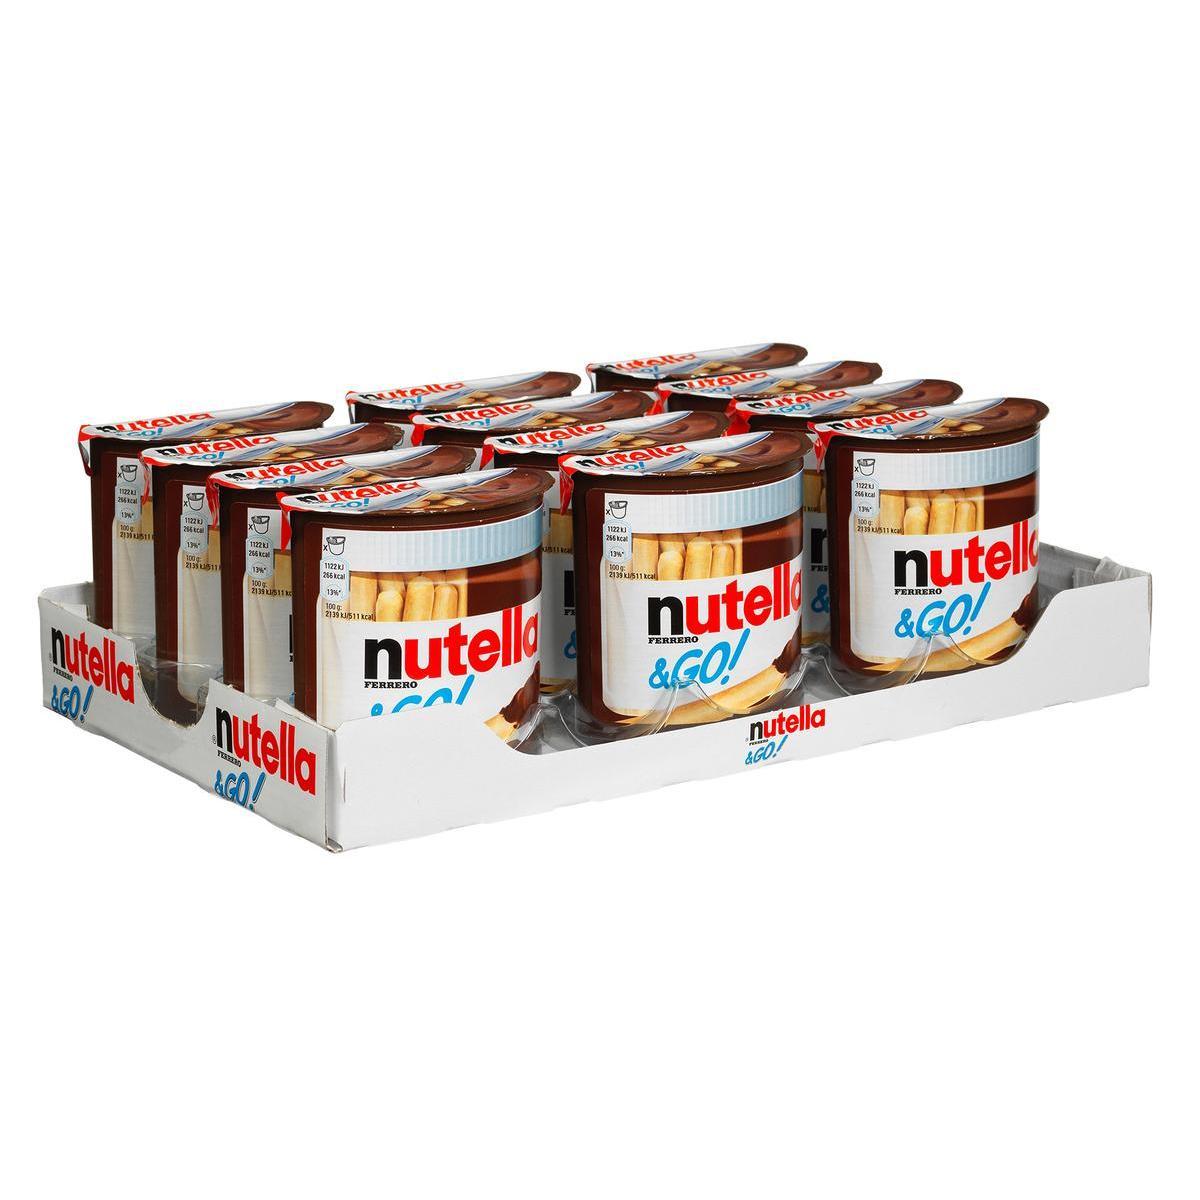 PACK NUTELLA & GO 52G